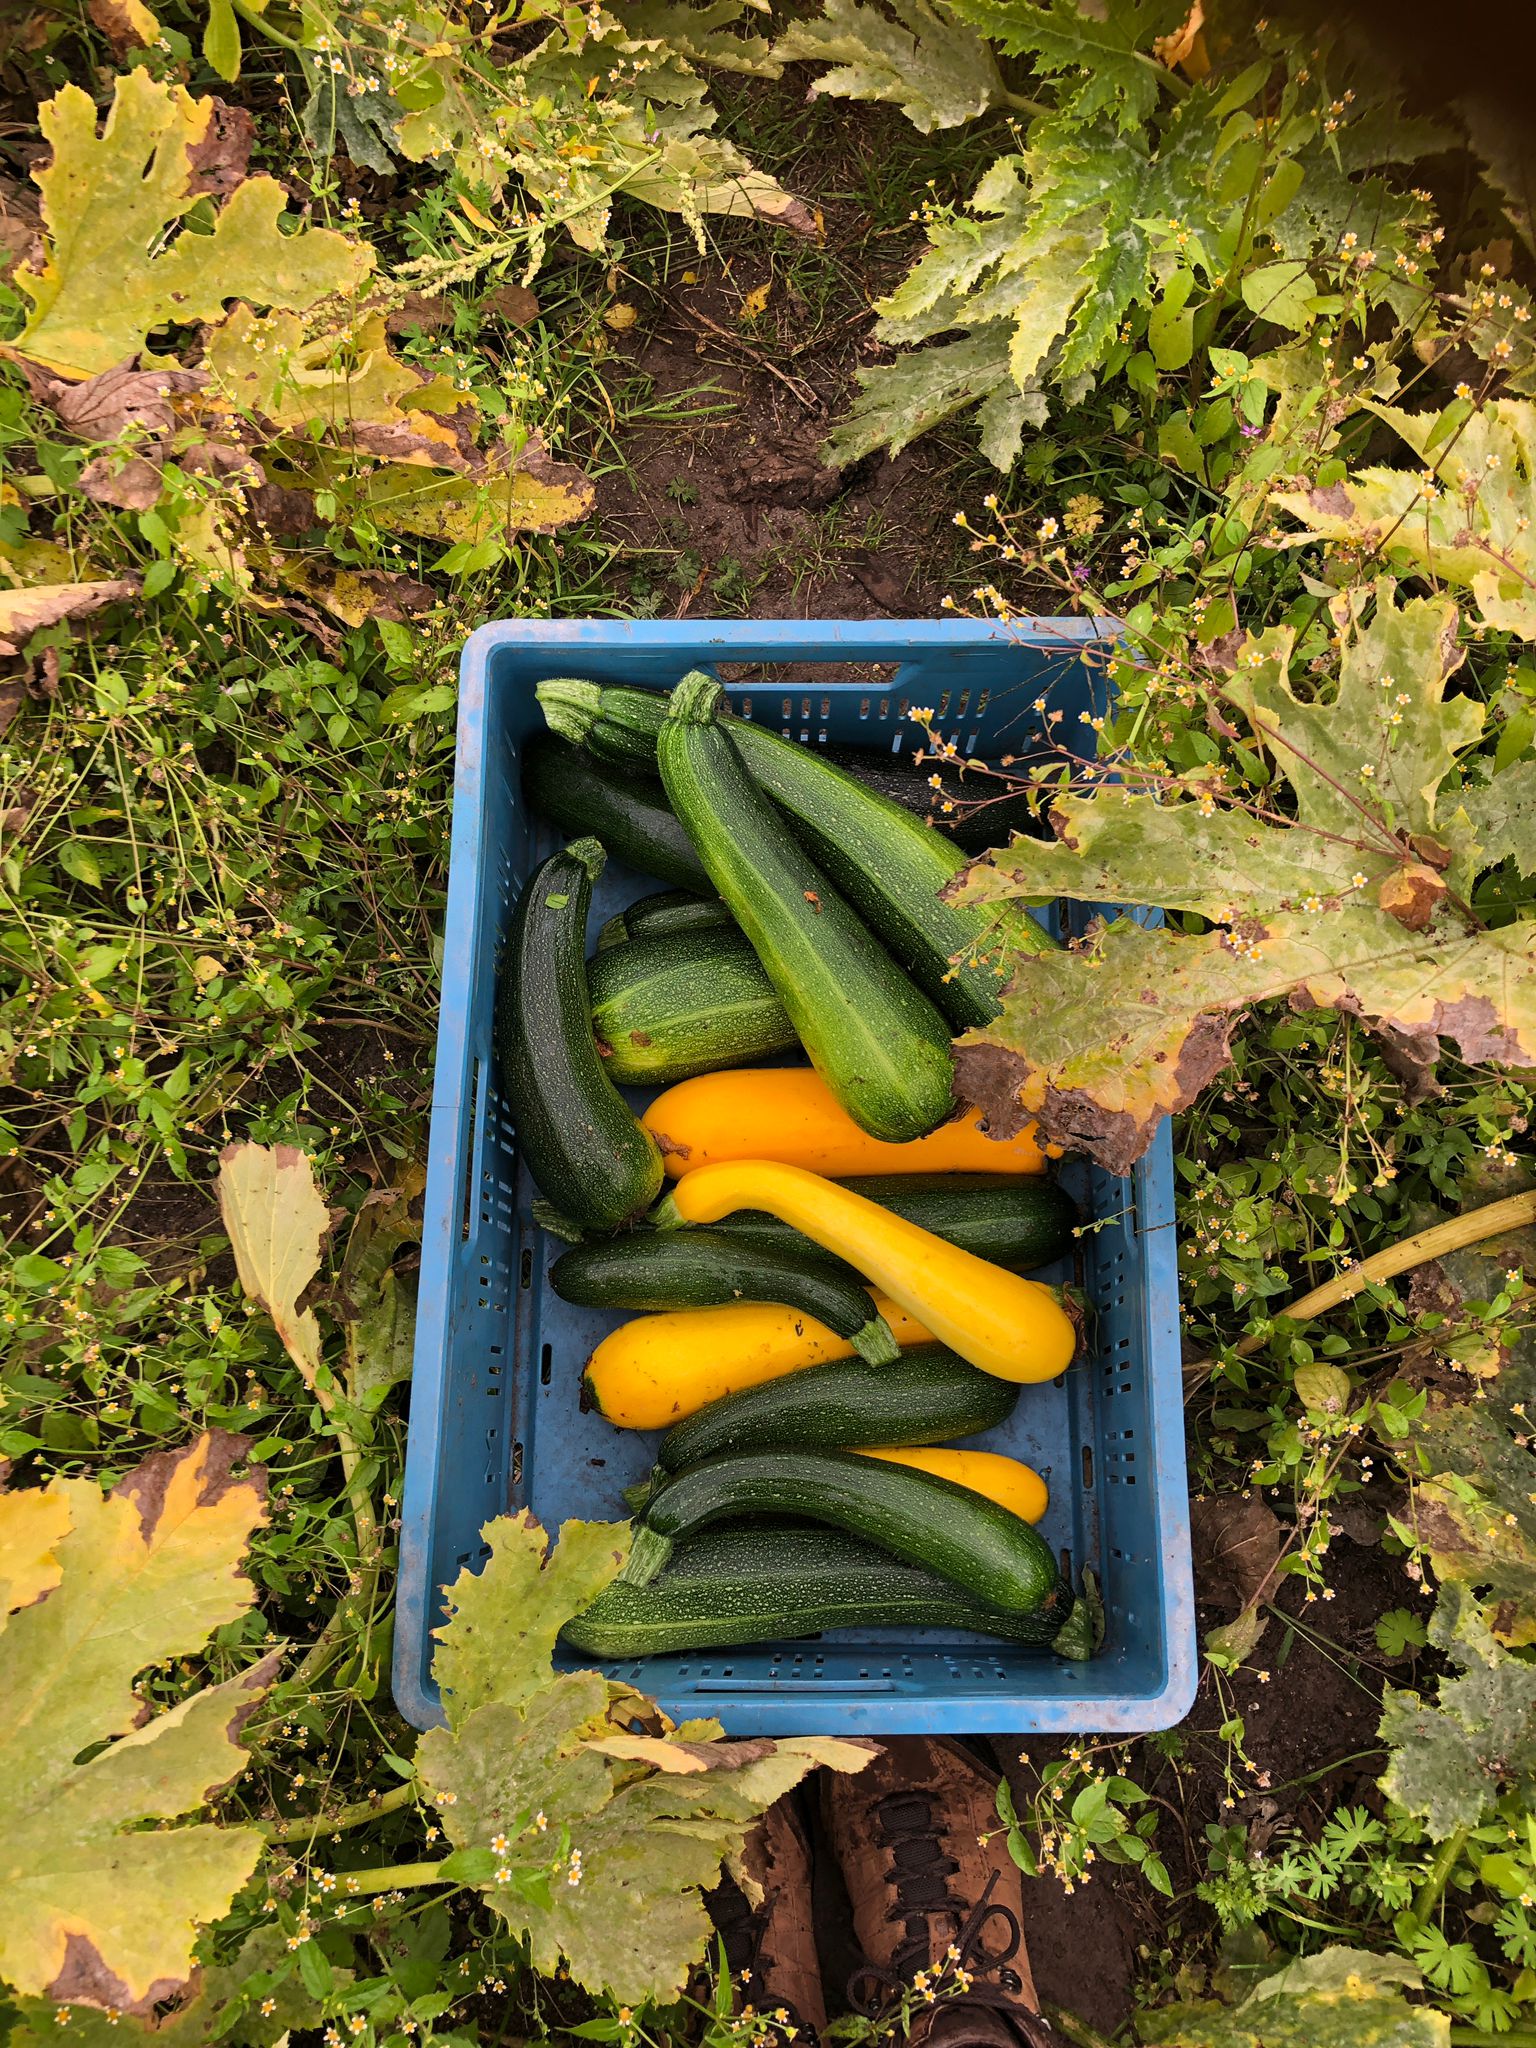 Some summer squash straight from the farm